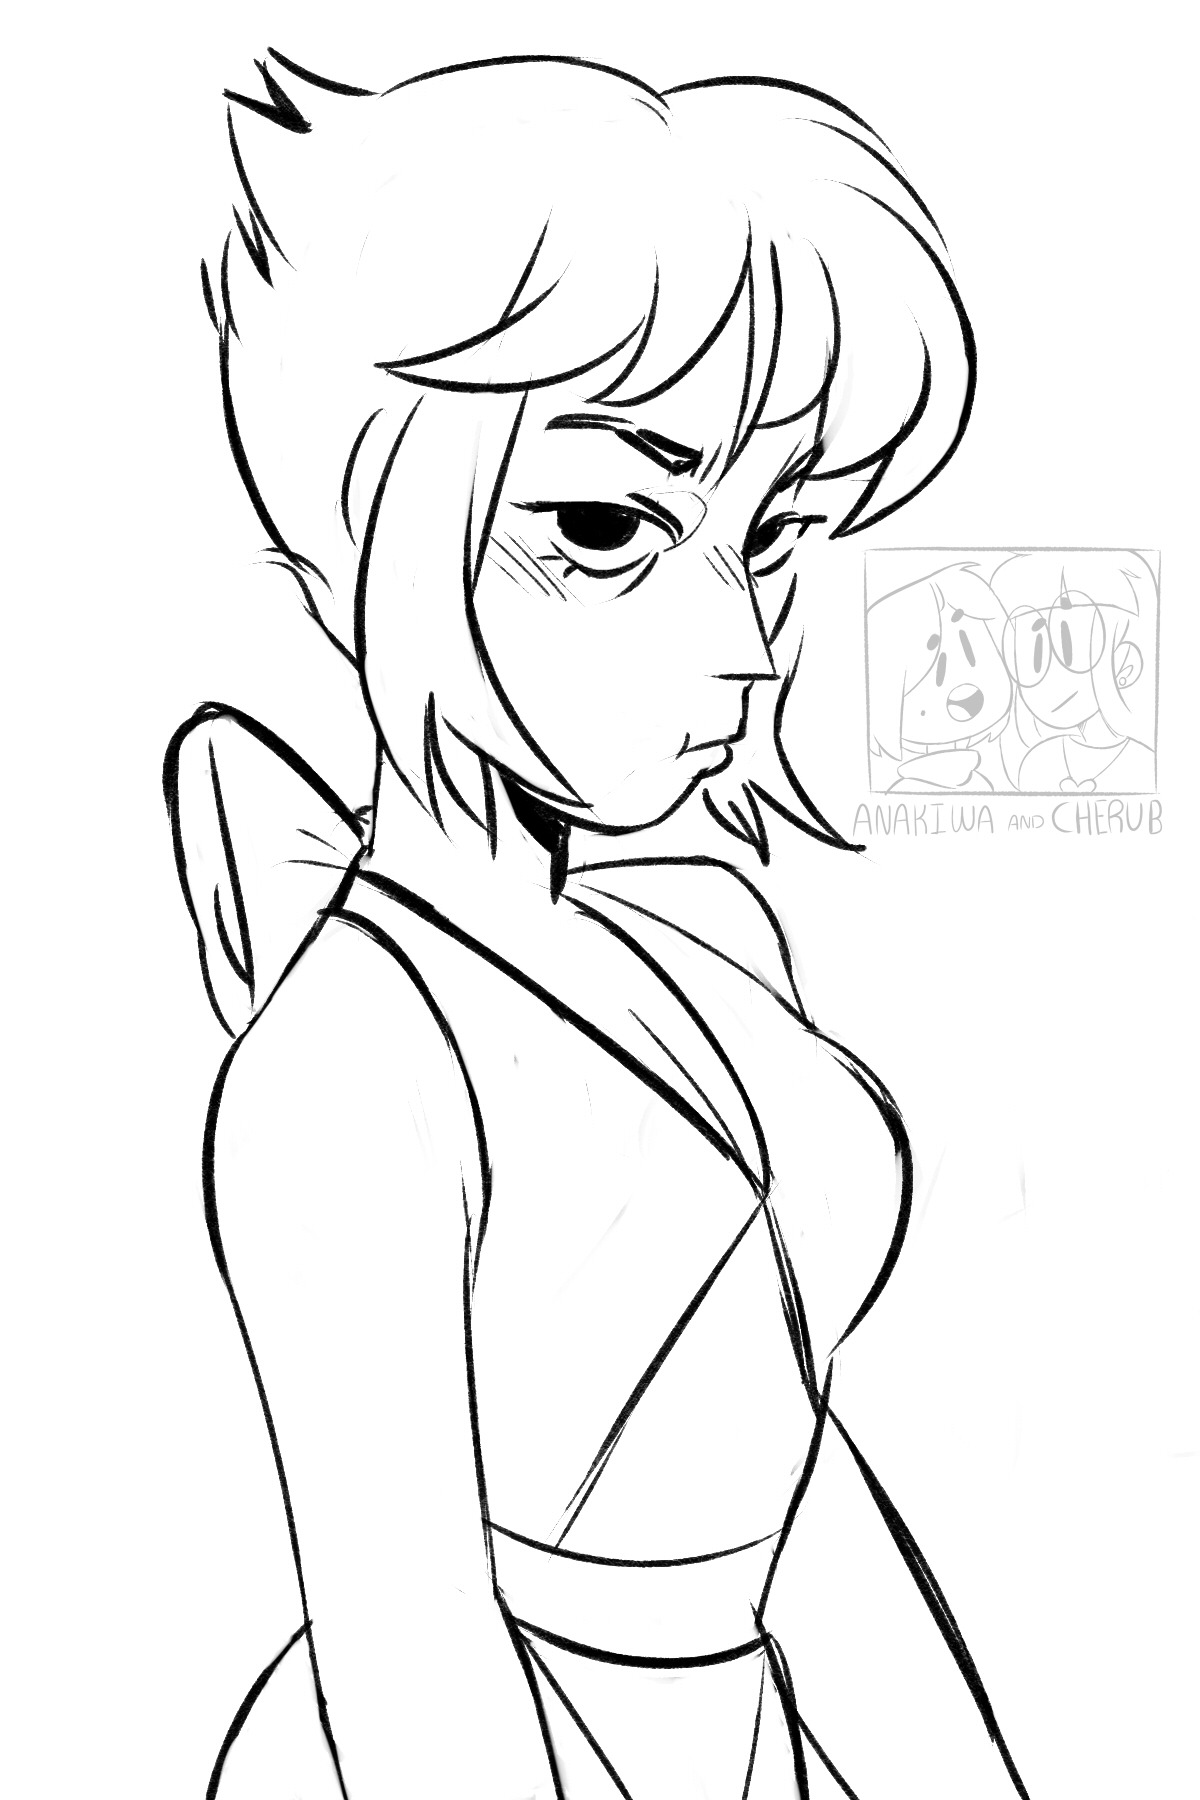 Here’s a sketch of a grumpy Lapis for all your grumpy Lapis needs! -Cherub